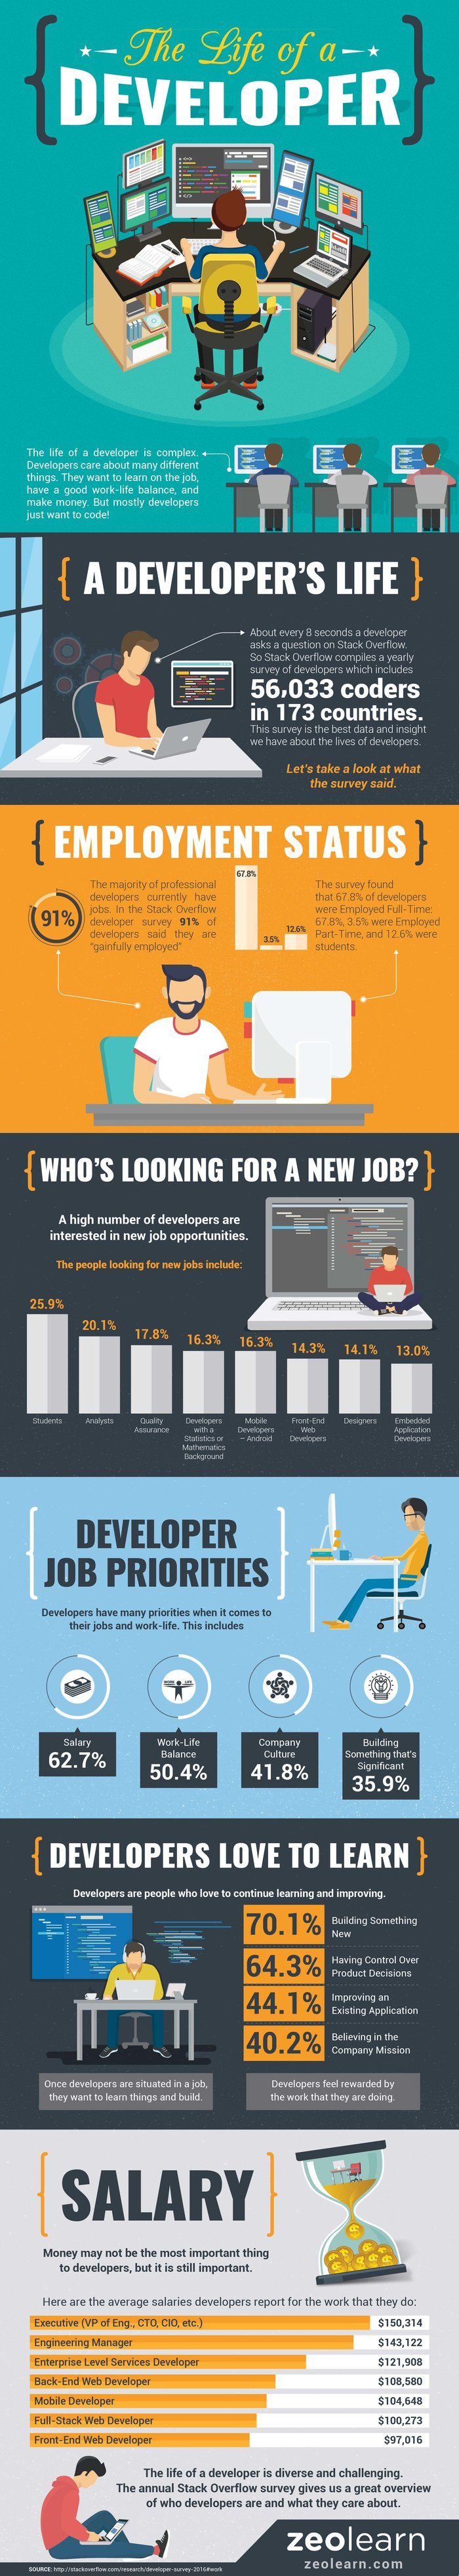 9 Hacks That Will Help You Land a Job as a Web Developer [Infographic]